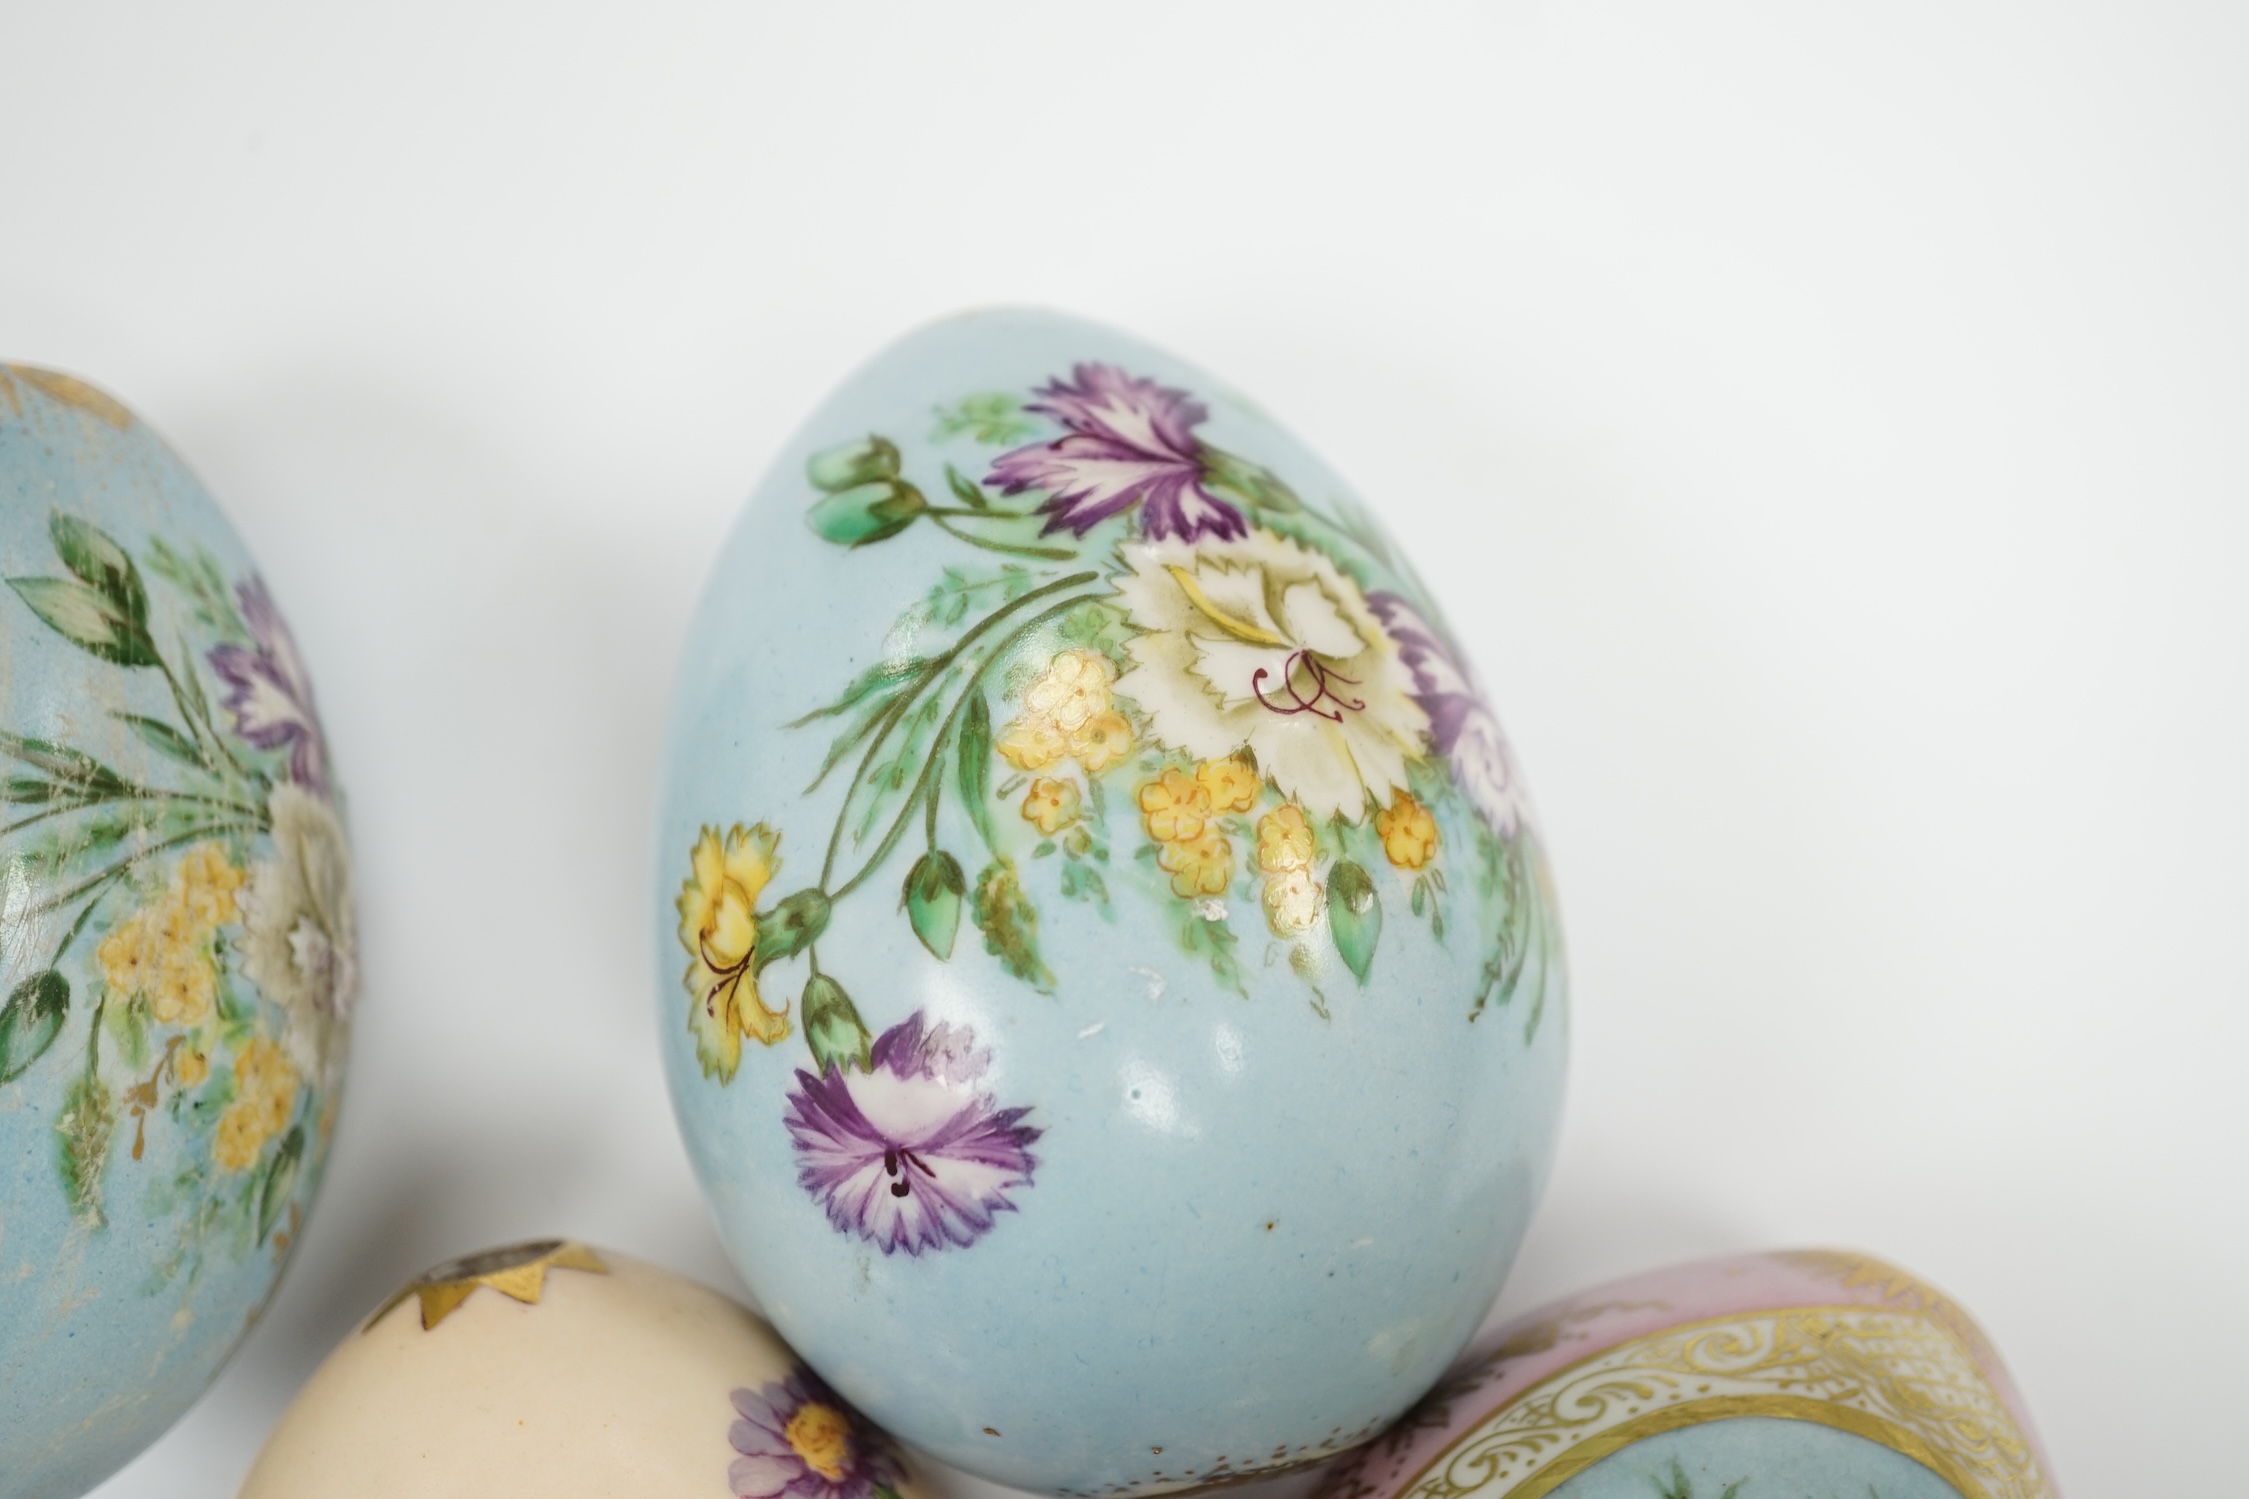 Four Russian porcelain Easter eggs, 19th century, 11cm high - Image 3 of 5